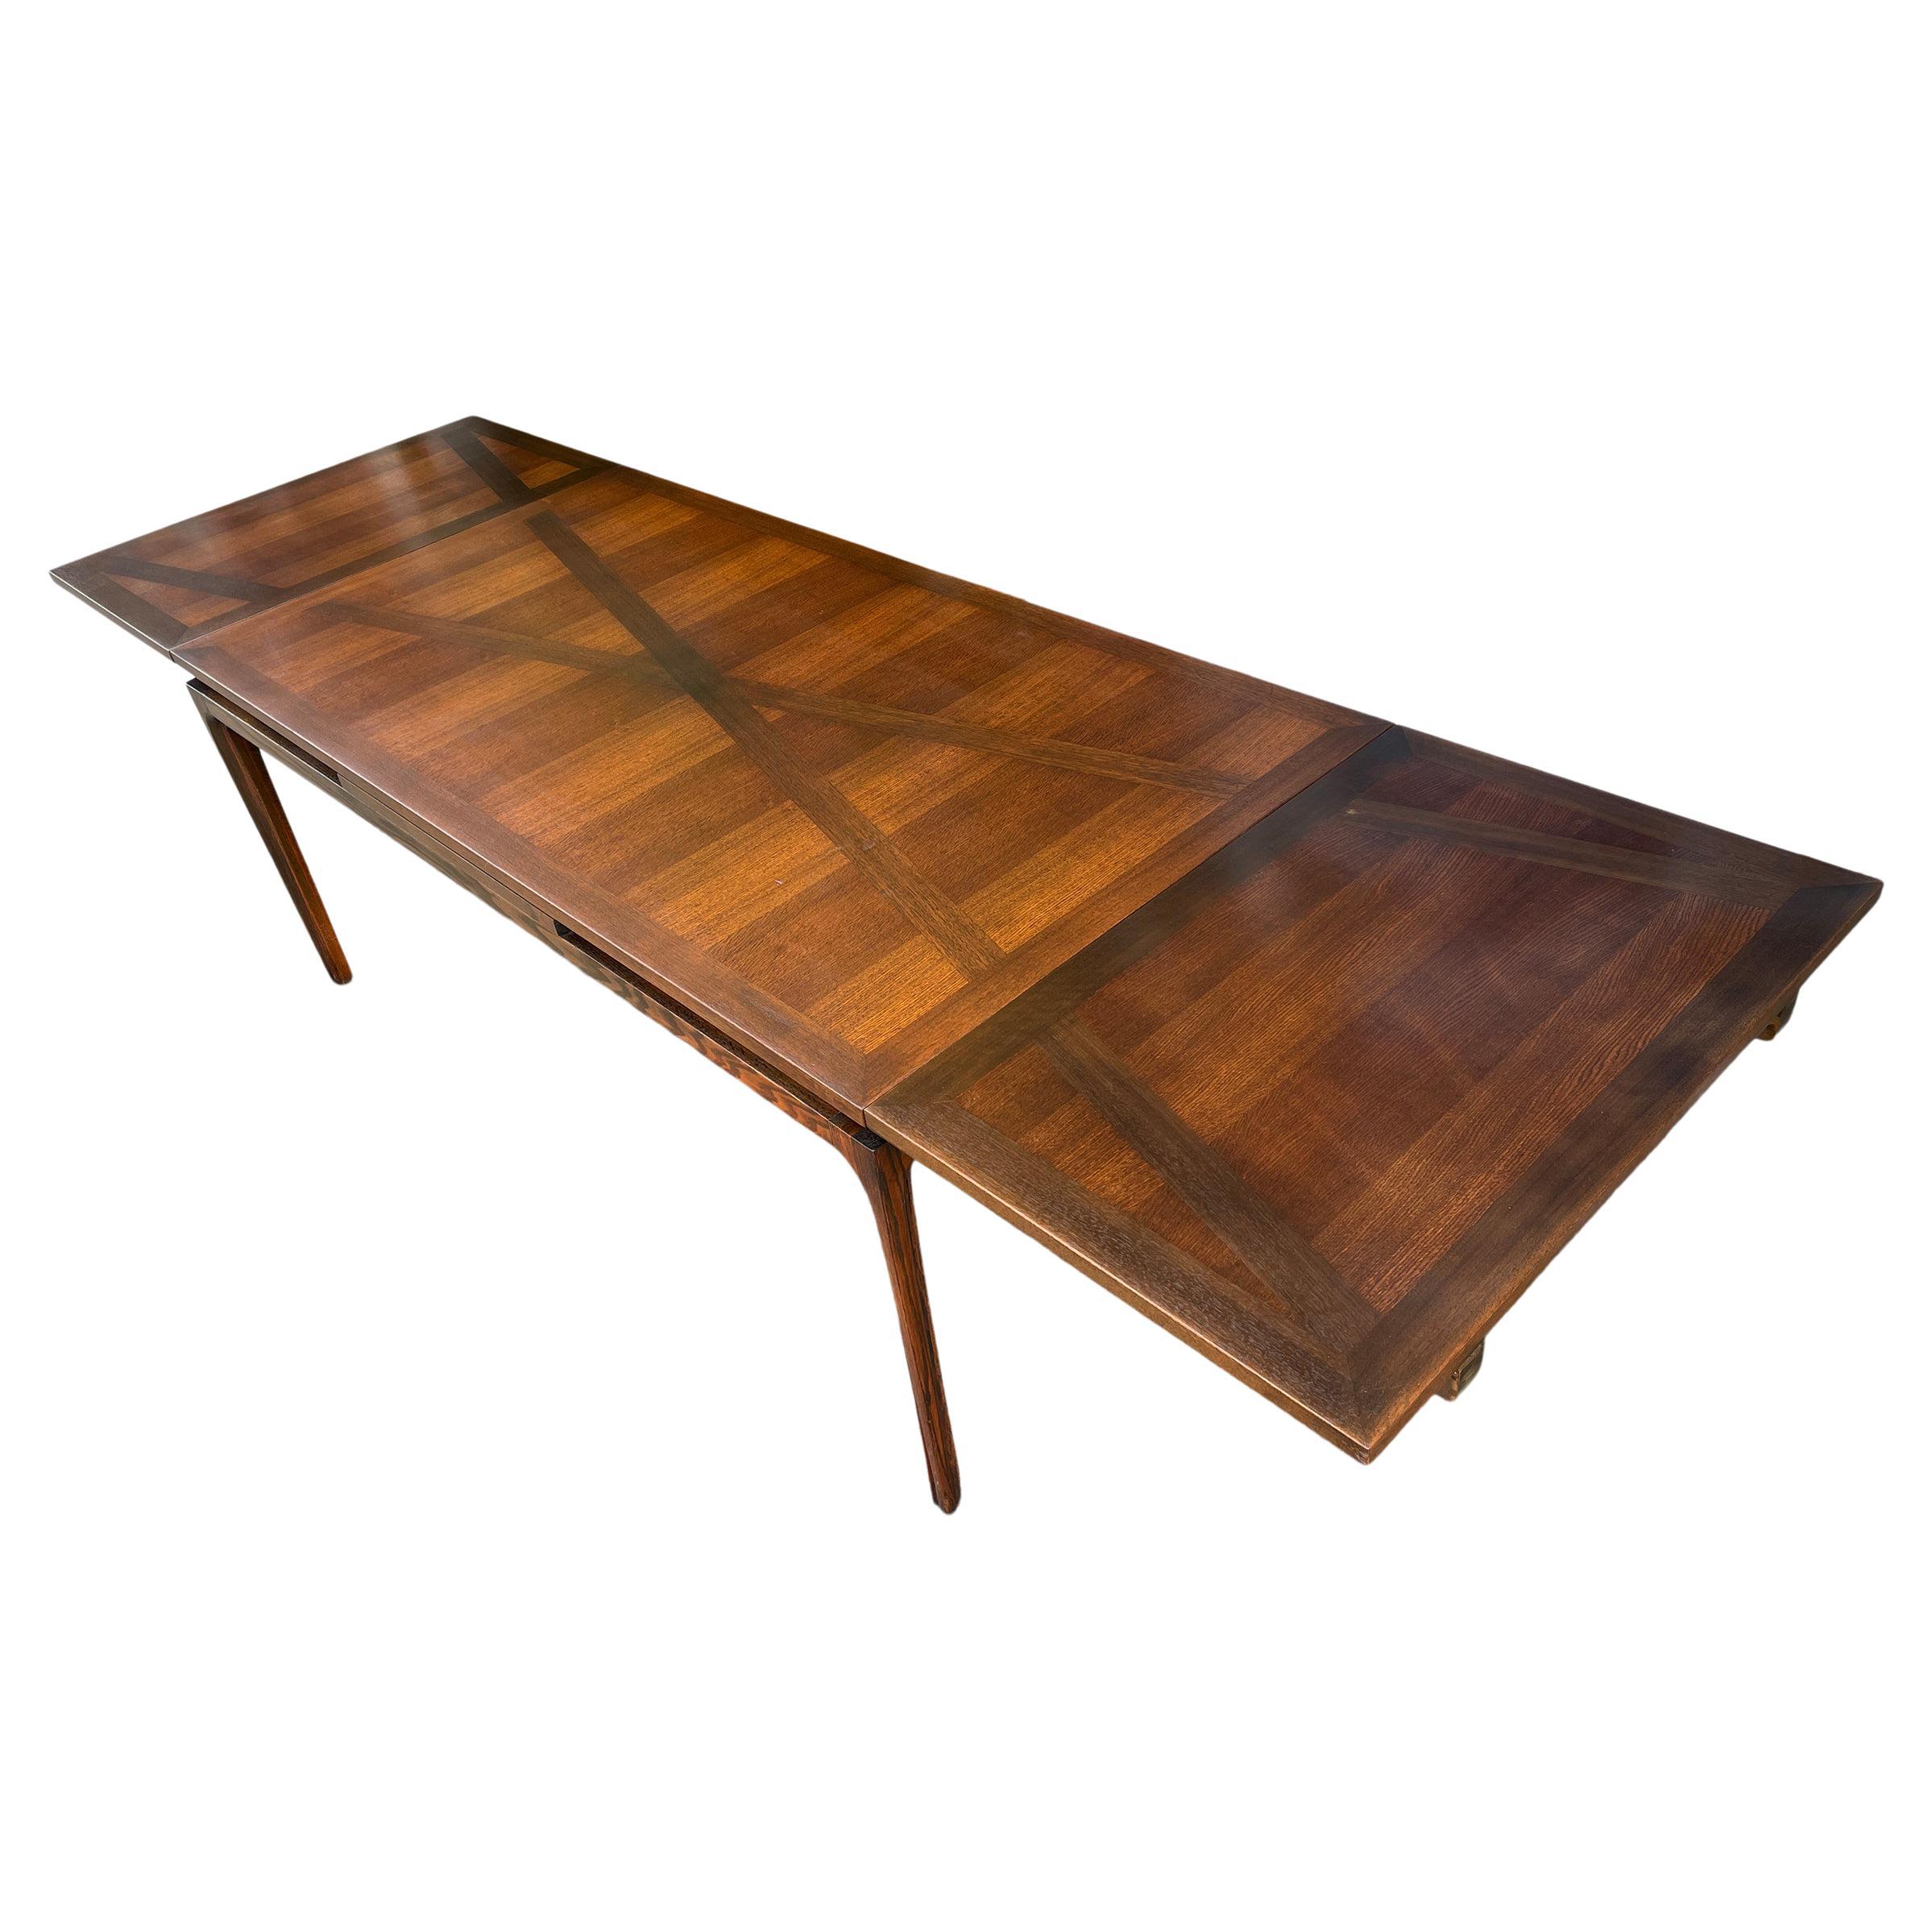 Beautiful Mid-Century Modern Romweber Jasper oak extension dining room table. Beautiful Solid Oak Dining table with pull out leaves on each side in great vintage condition. Has X veneer inlay throughout table and leaves. Very sold and sturdy. Table